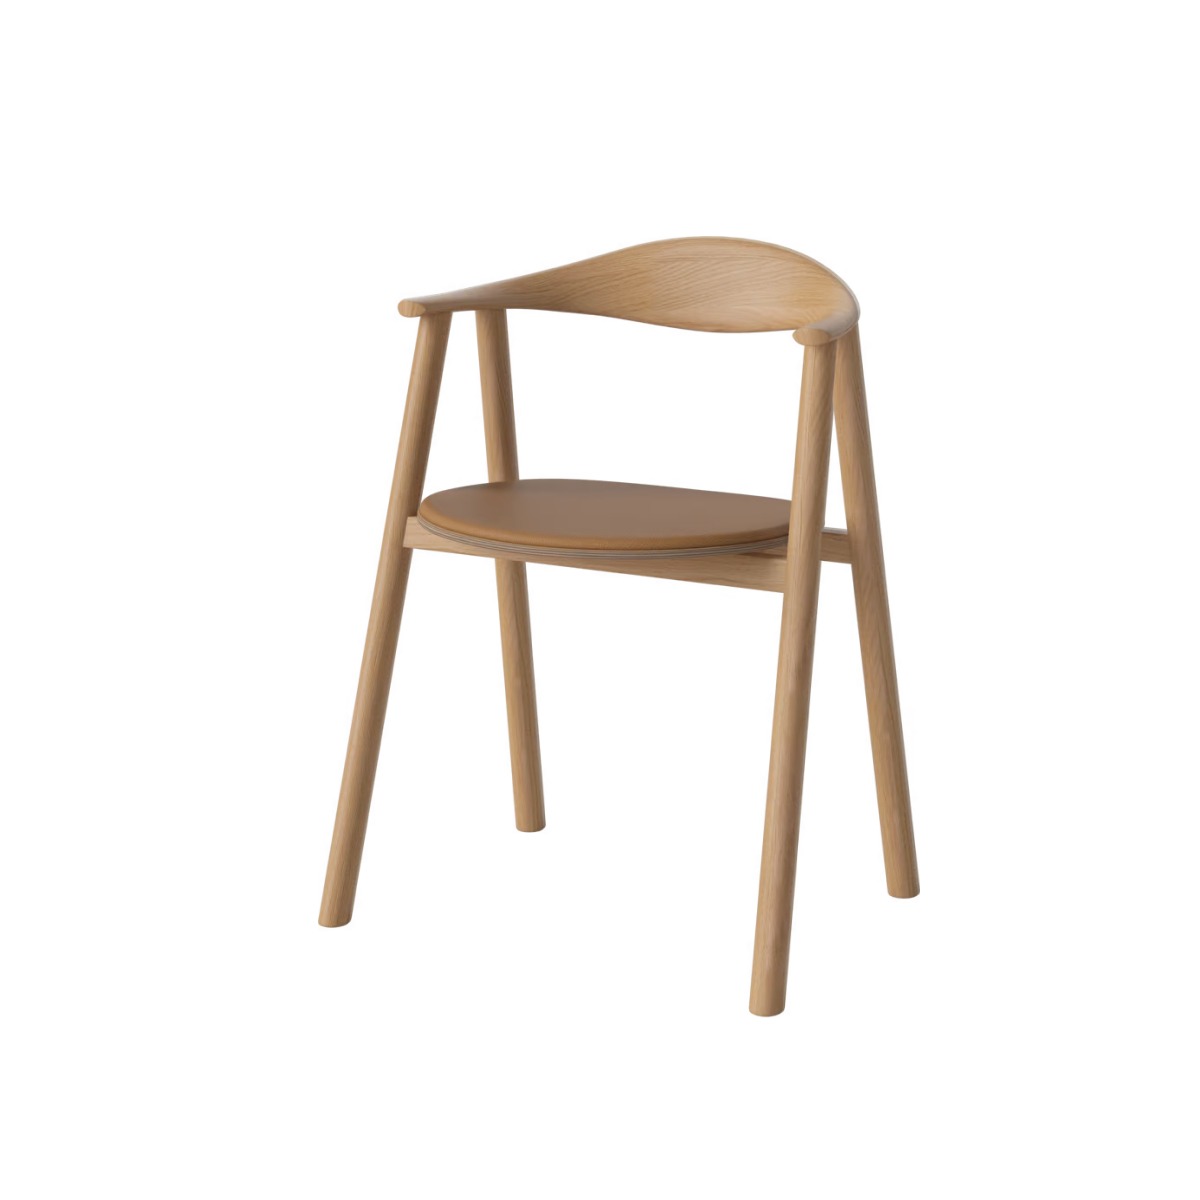 BOLIA Swing Upholstered Dining Chair - Oak / Leather Cognac